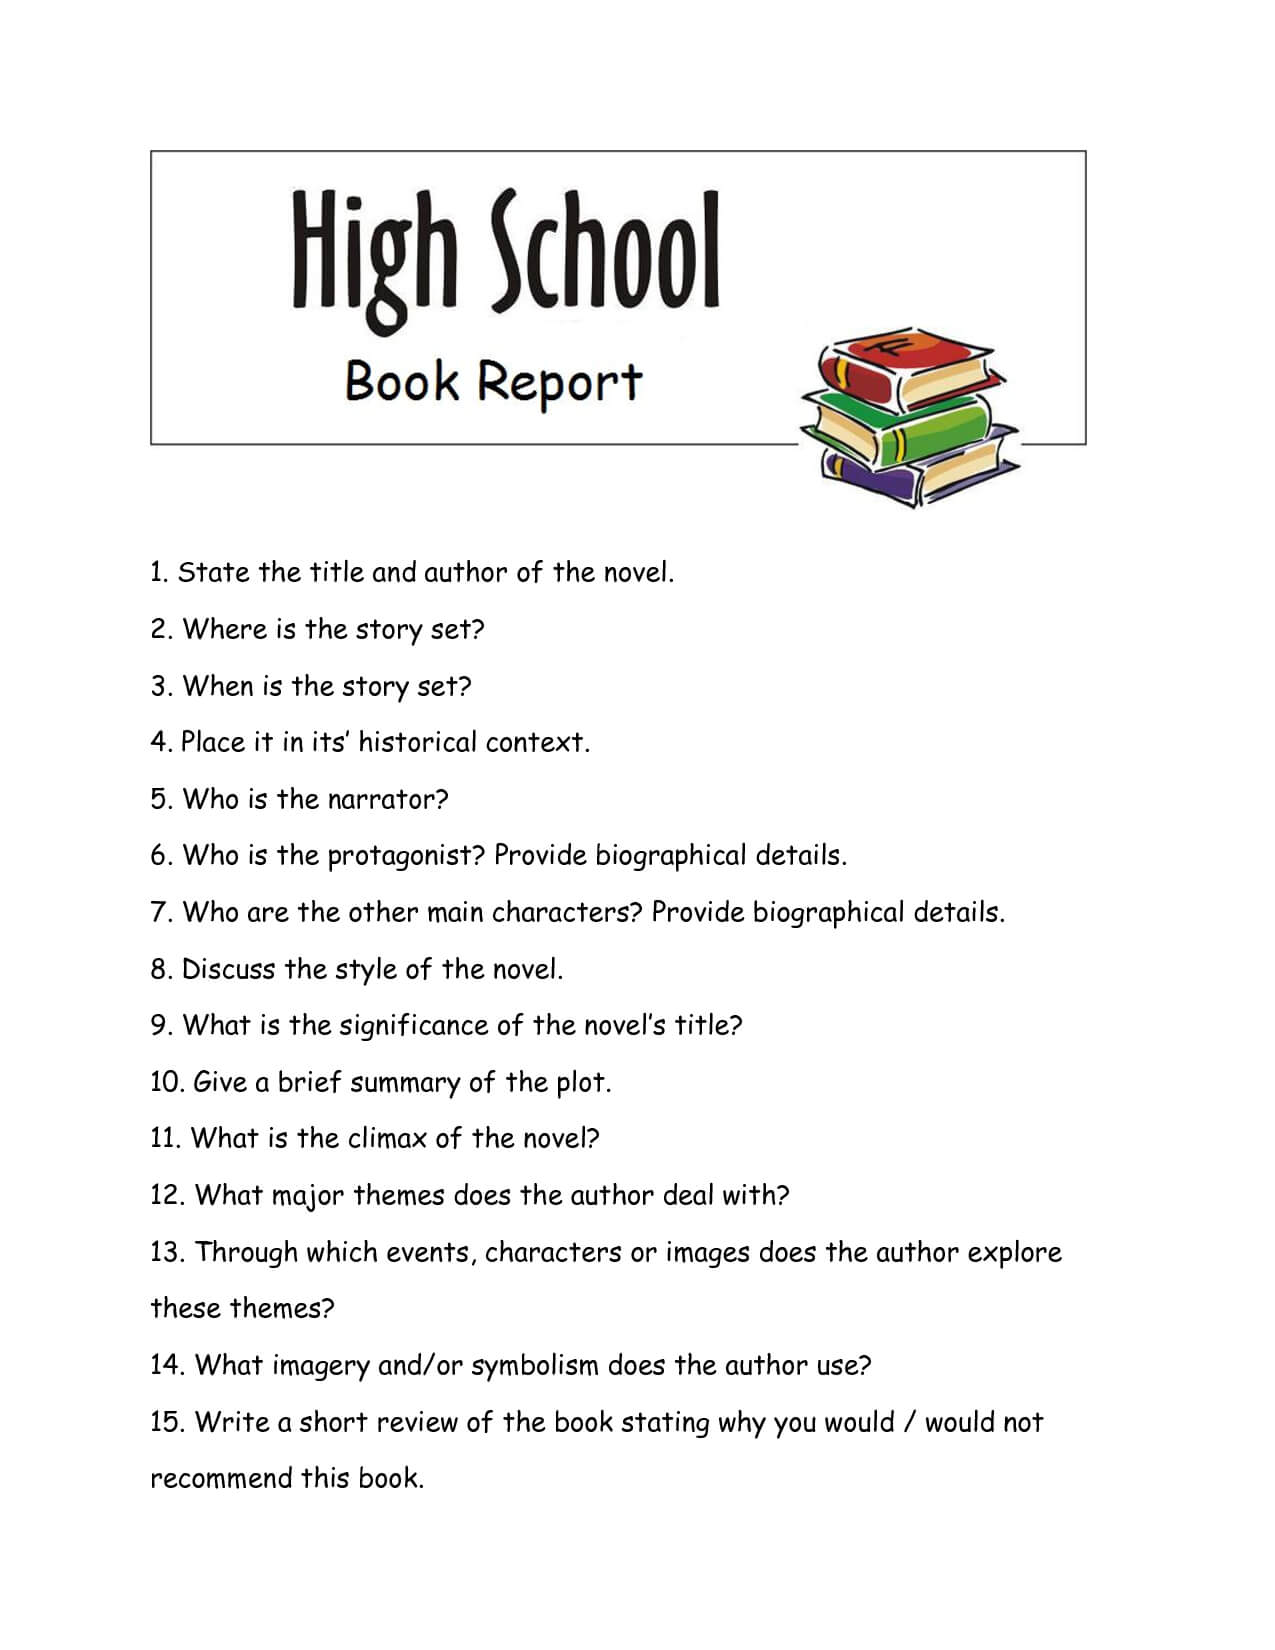 High School Book Report - I Love This Book Report Form. It In Book Report Template High School